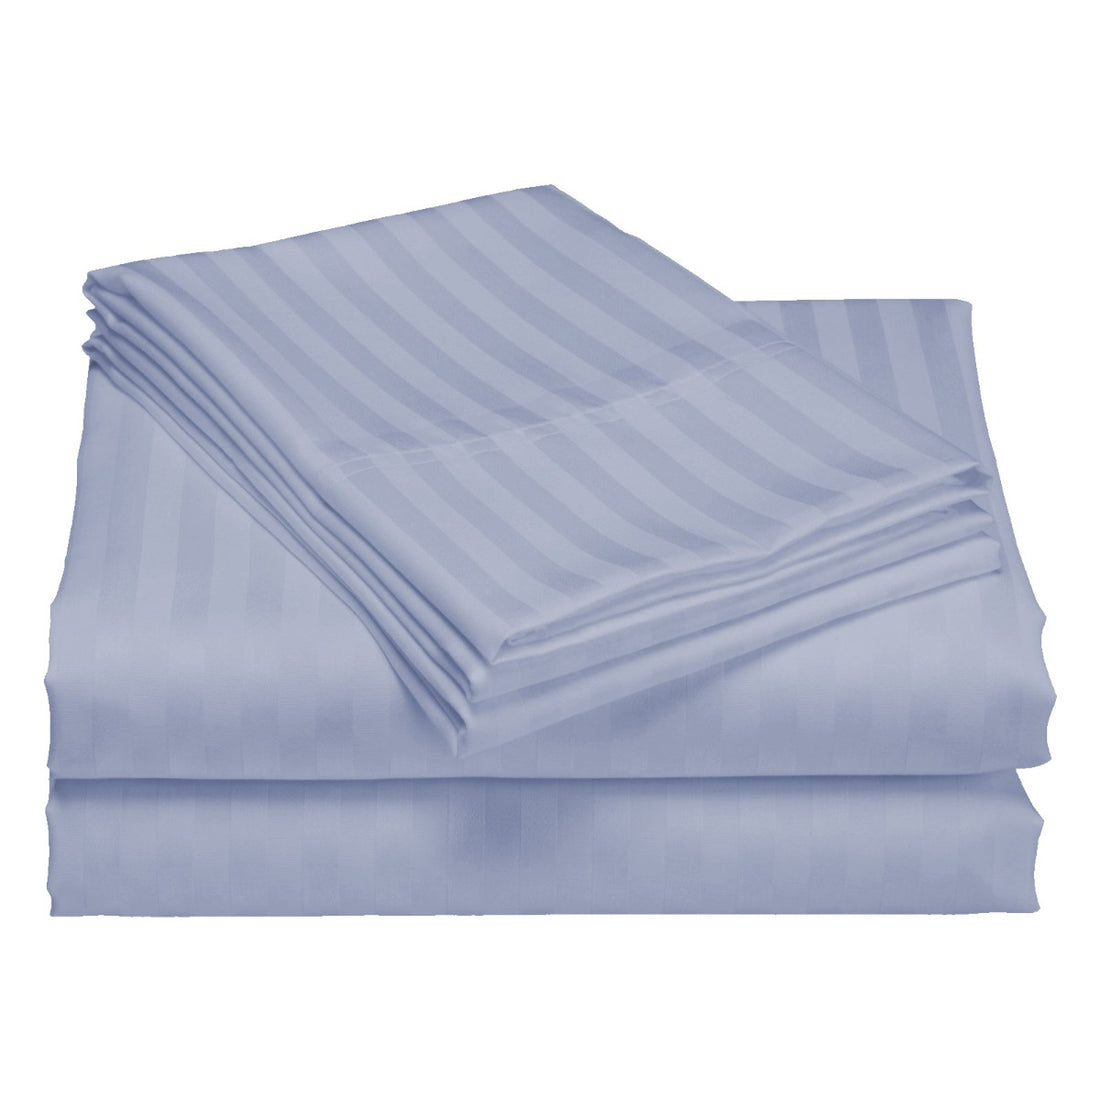 Royal Comfort 1200TC Quilt Cover Set Damask Cotton Blend Luxury Sateen Bedding - King - Blue Fog-Quilt Covers-PEROZ Accessories